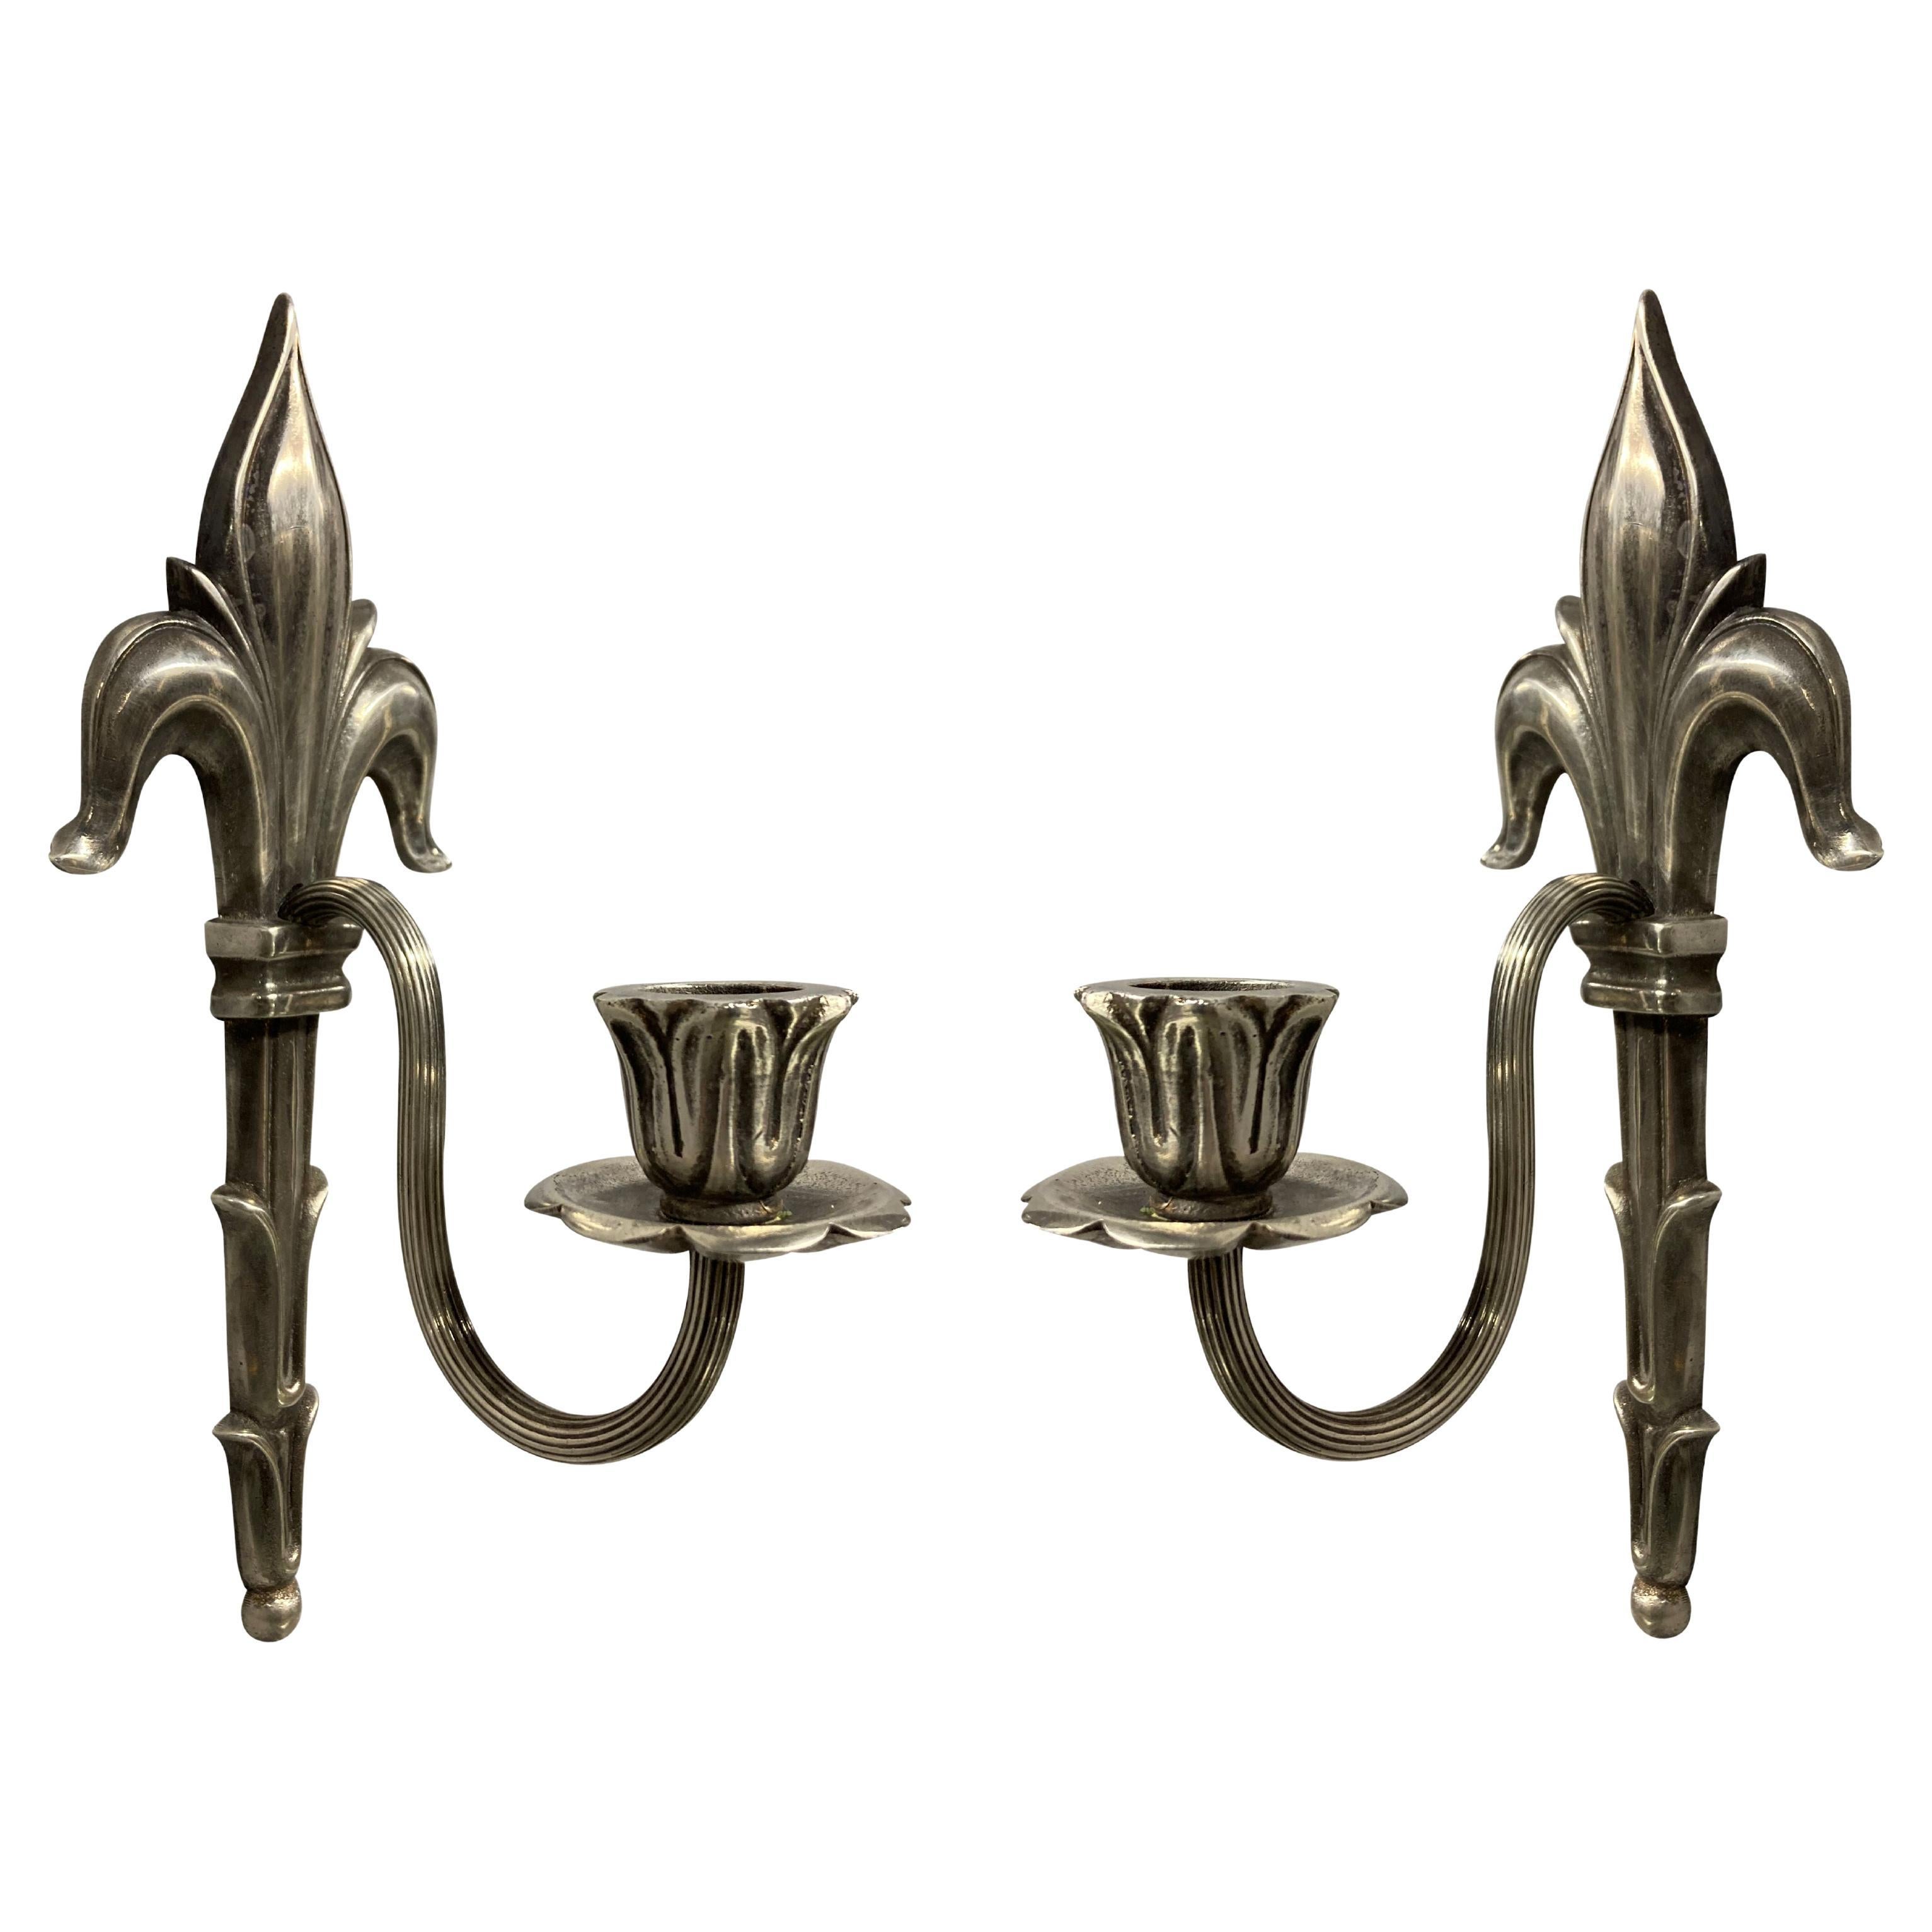 Pair of Edwardian Silver Plated Single Arm Sconces For Sale